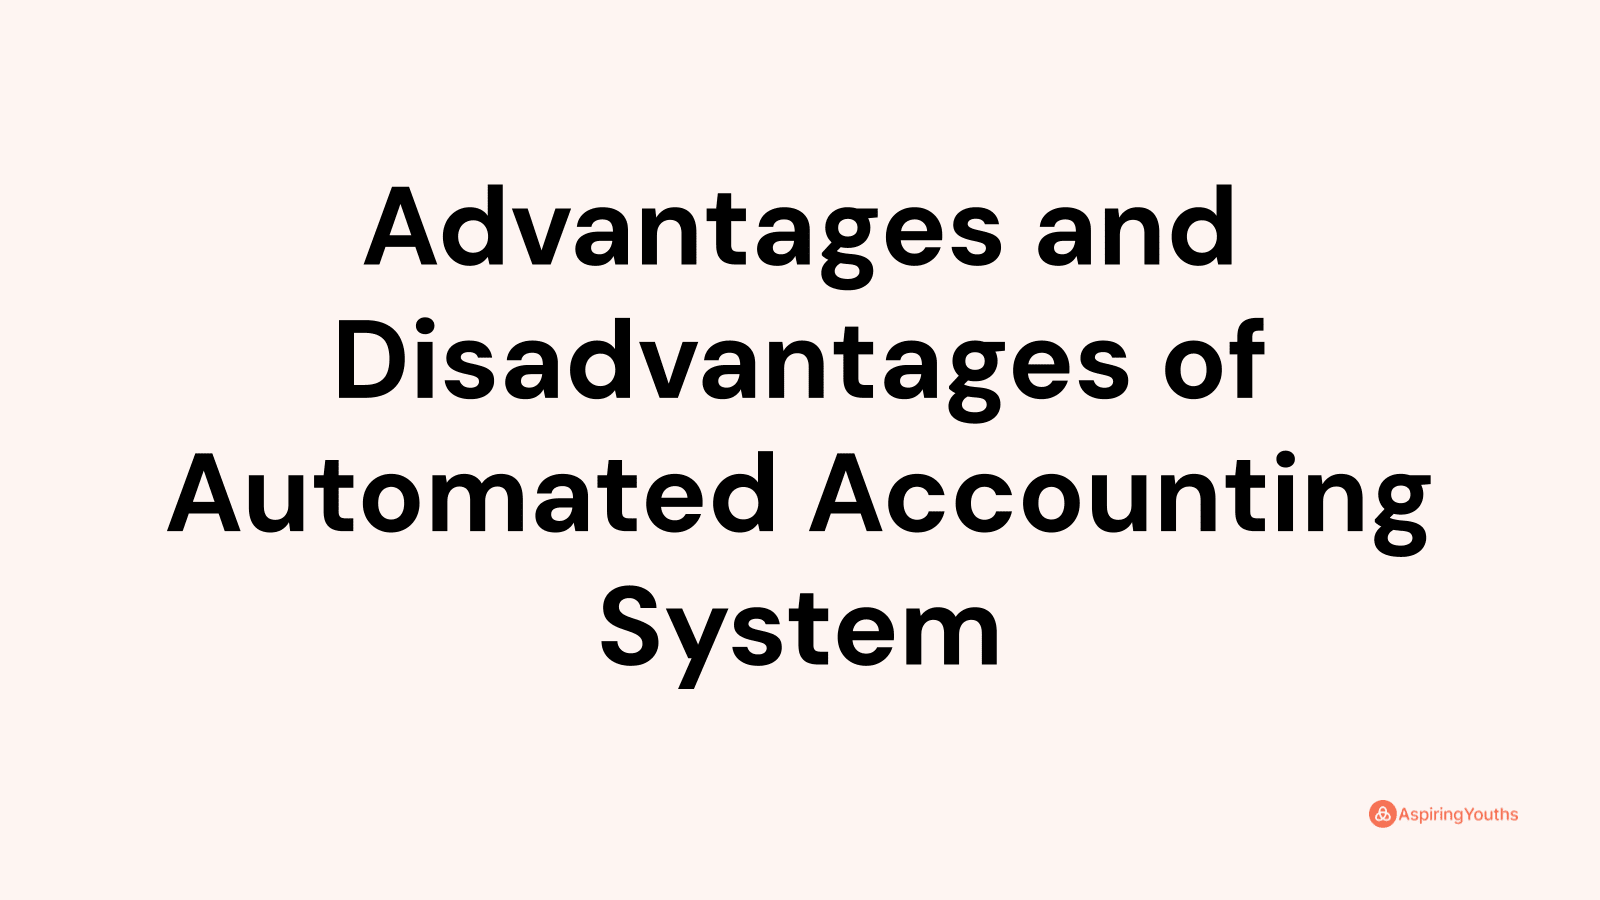 Advantages and disadvantages of Automated Accounting System